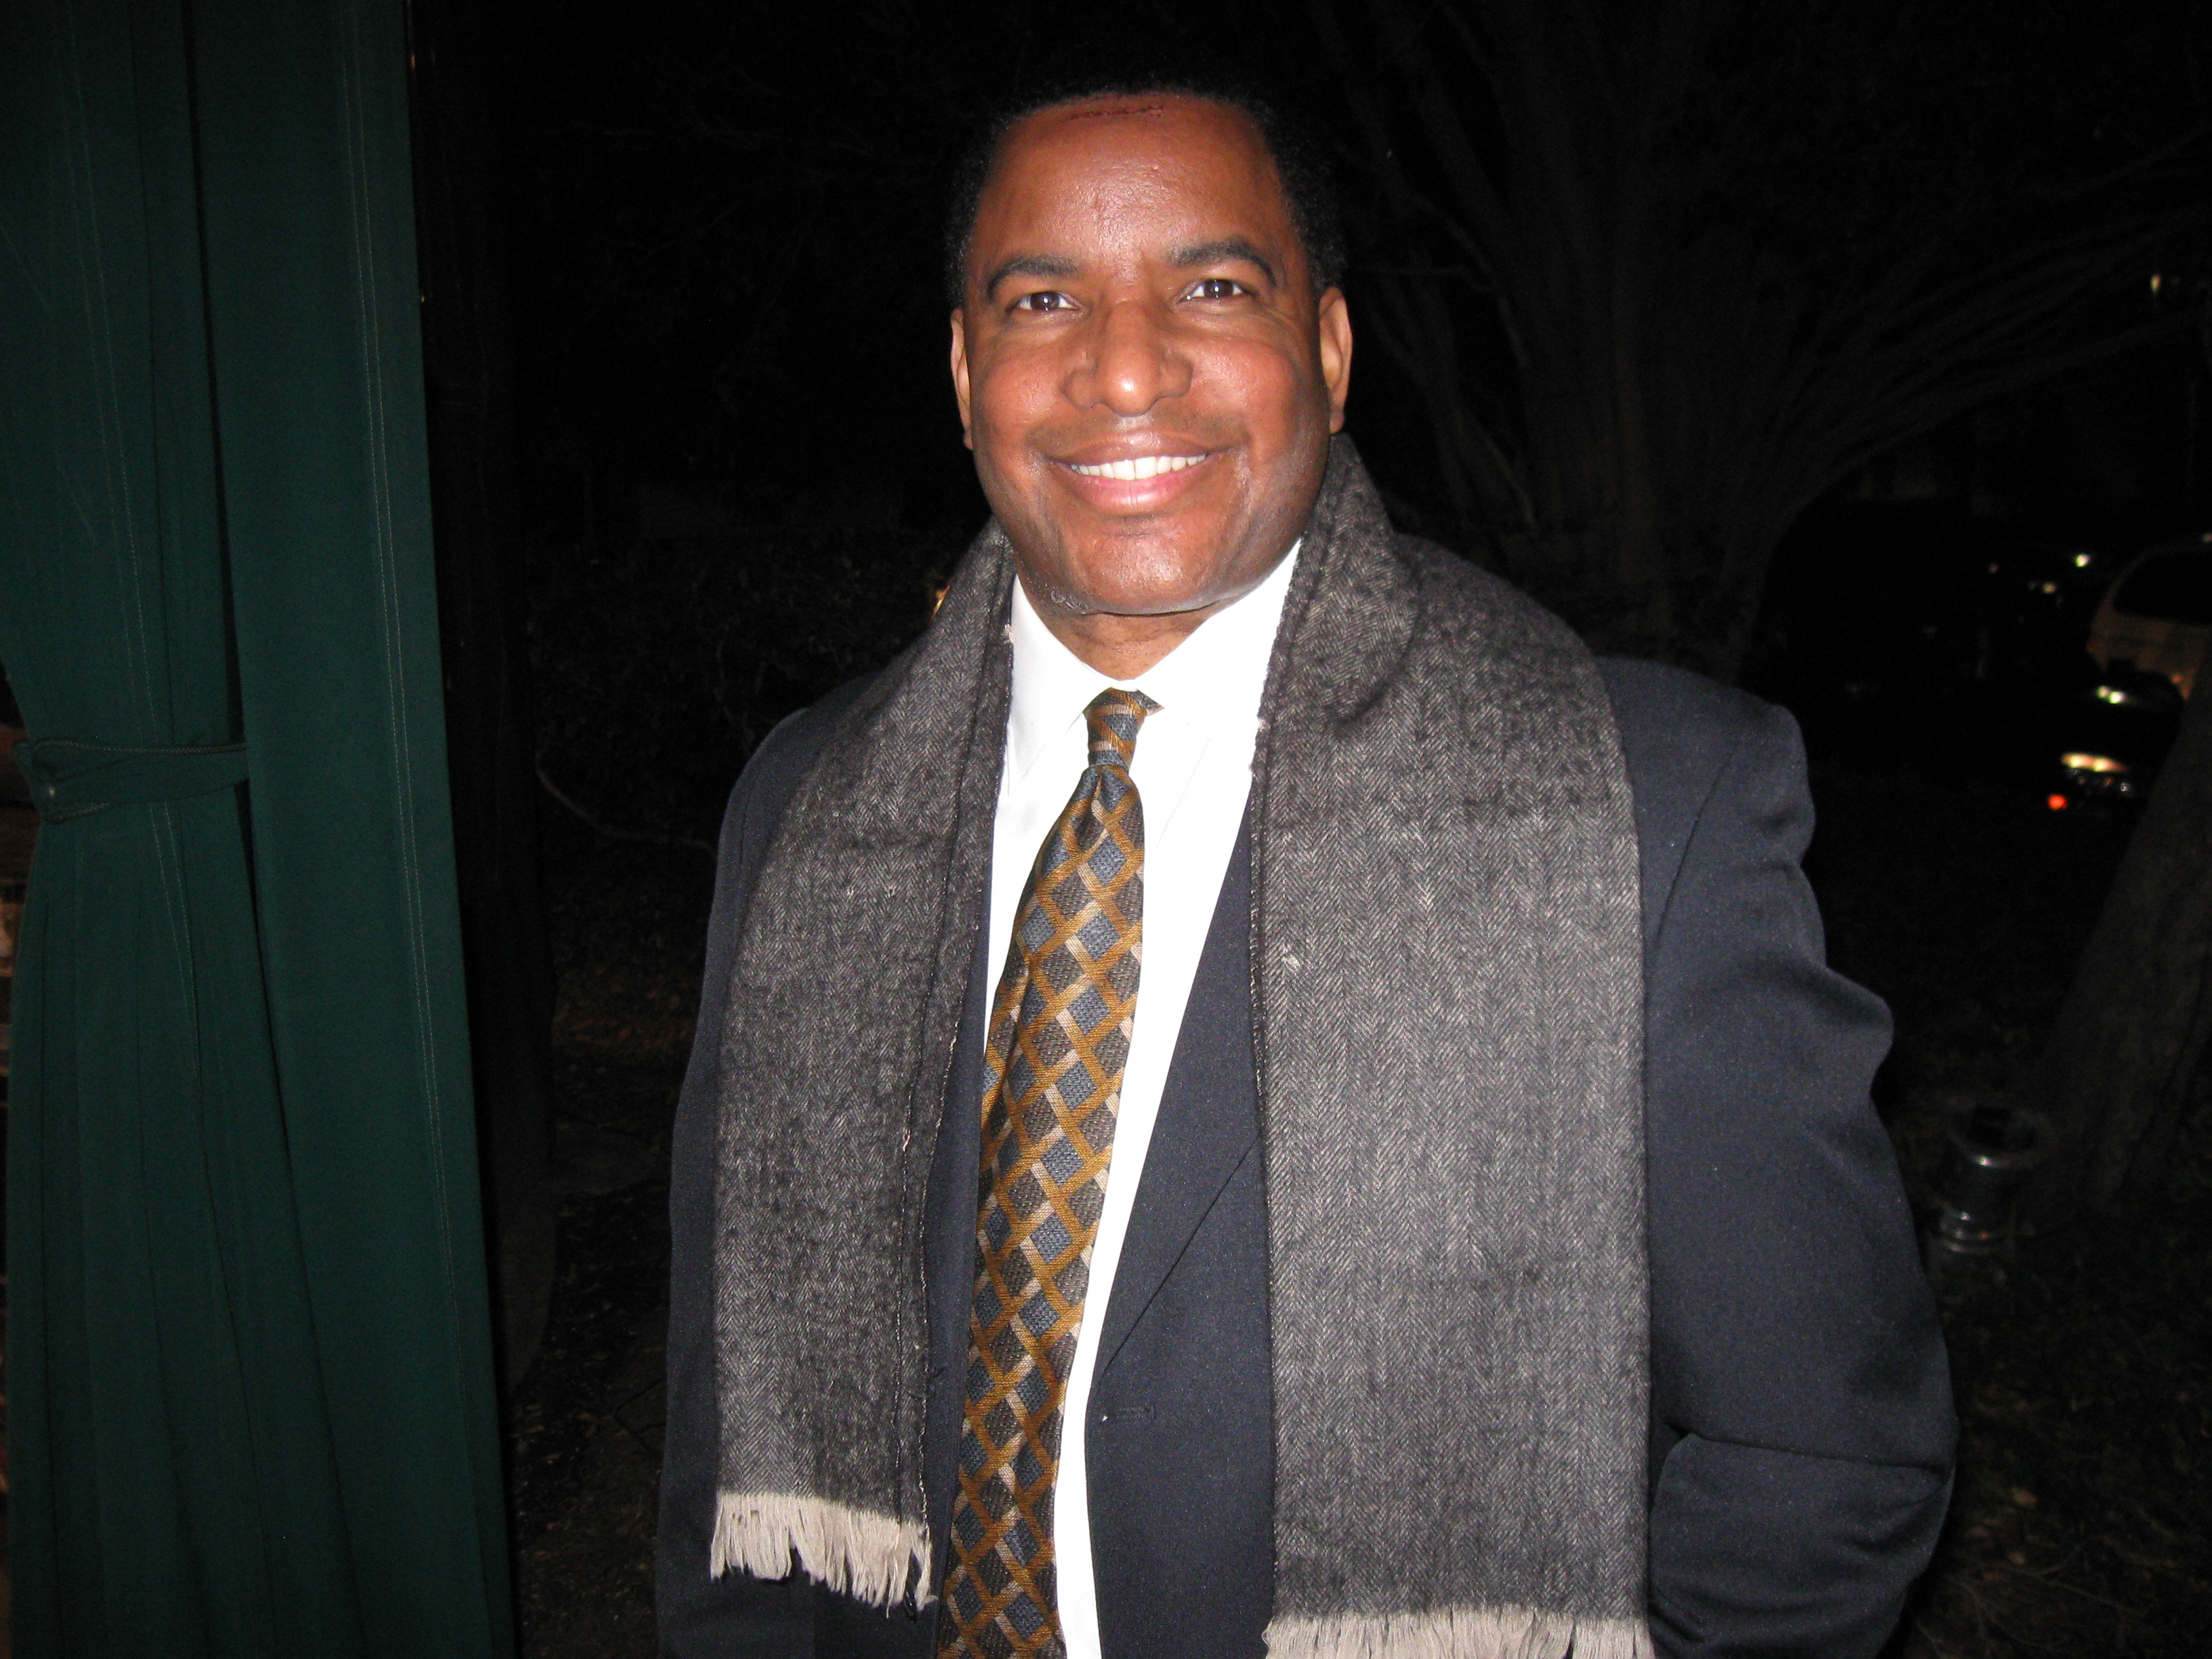 Producer Kirby Britten arriving at the MMPA Awards in Hollywood, CA on February 10, 2011.